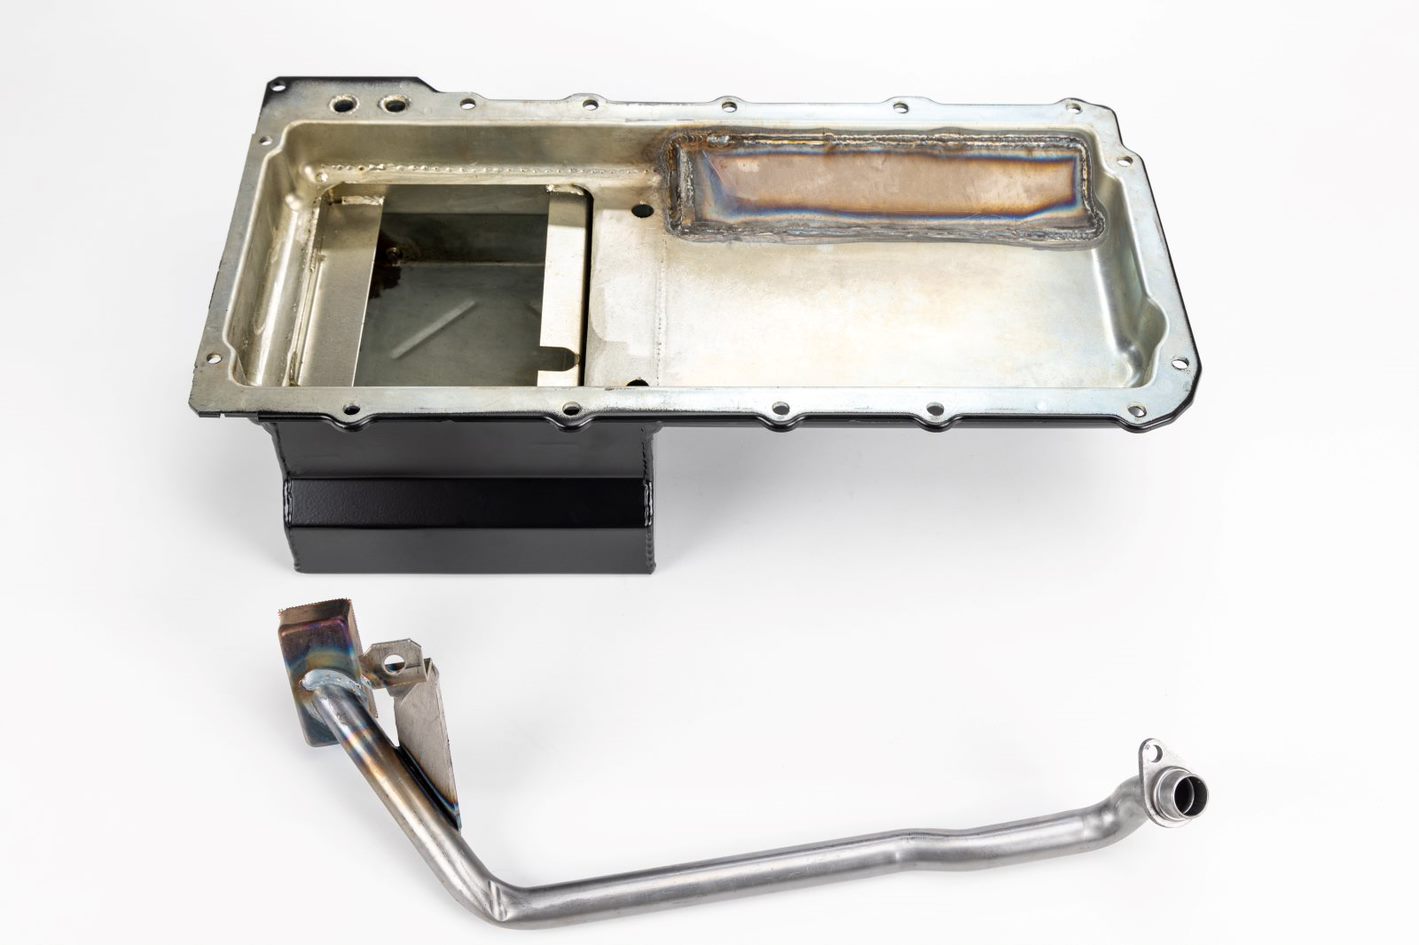 Image of the top of the custom oil pan and pickup tube for the 1982-1991 Porsche 944 LS Swap Kit.